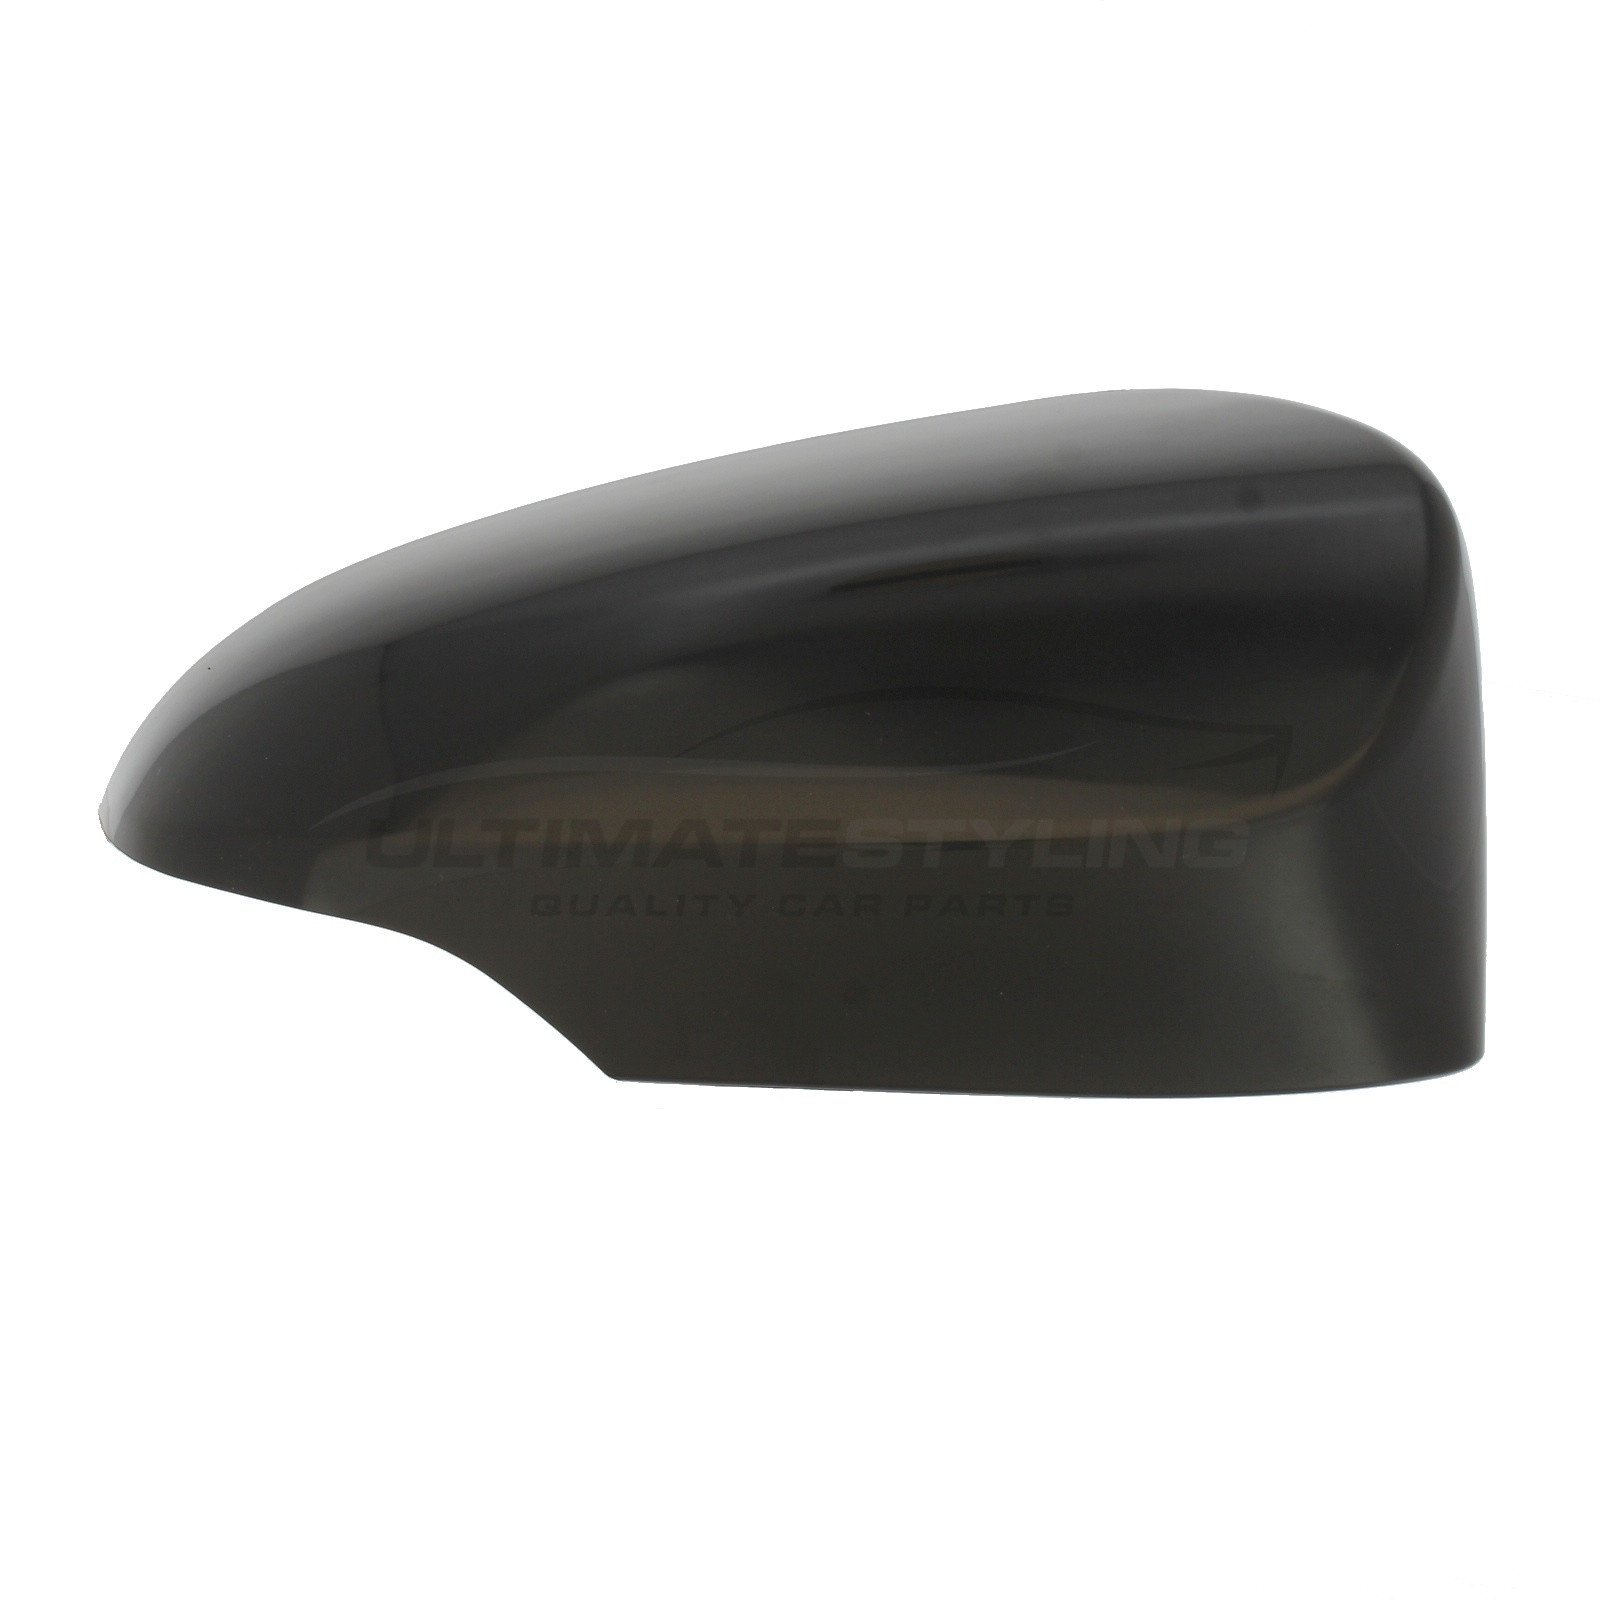 Toyota Auris 2012-2019, Toyota C-HR 2016-> Wing Mirror Cover Cap Casing Primed Drivers Side (RH)